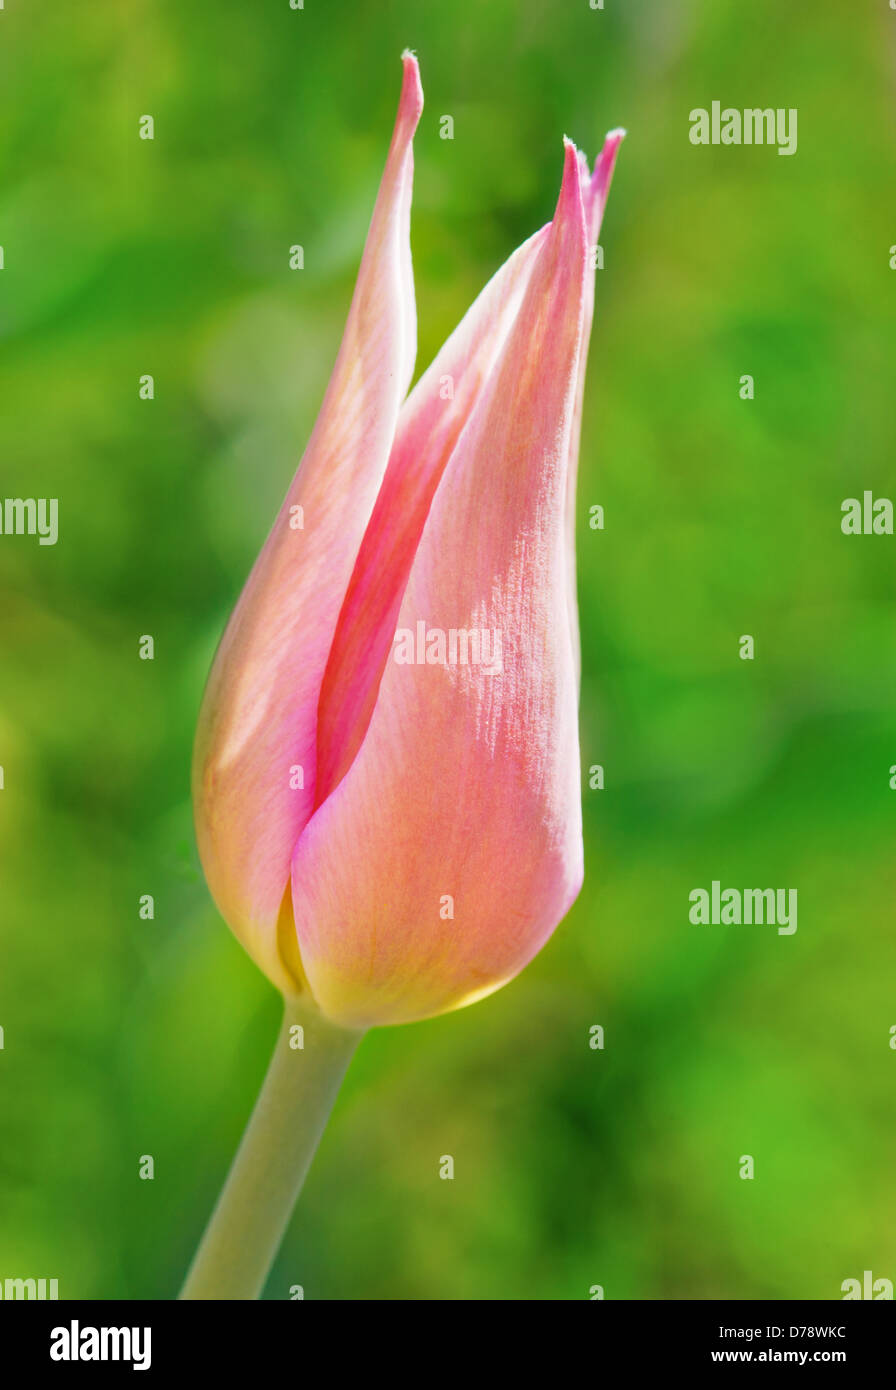 Pink tulip flower on green background Stock Photo